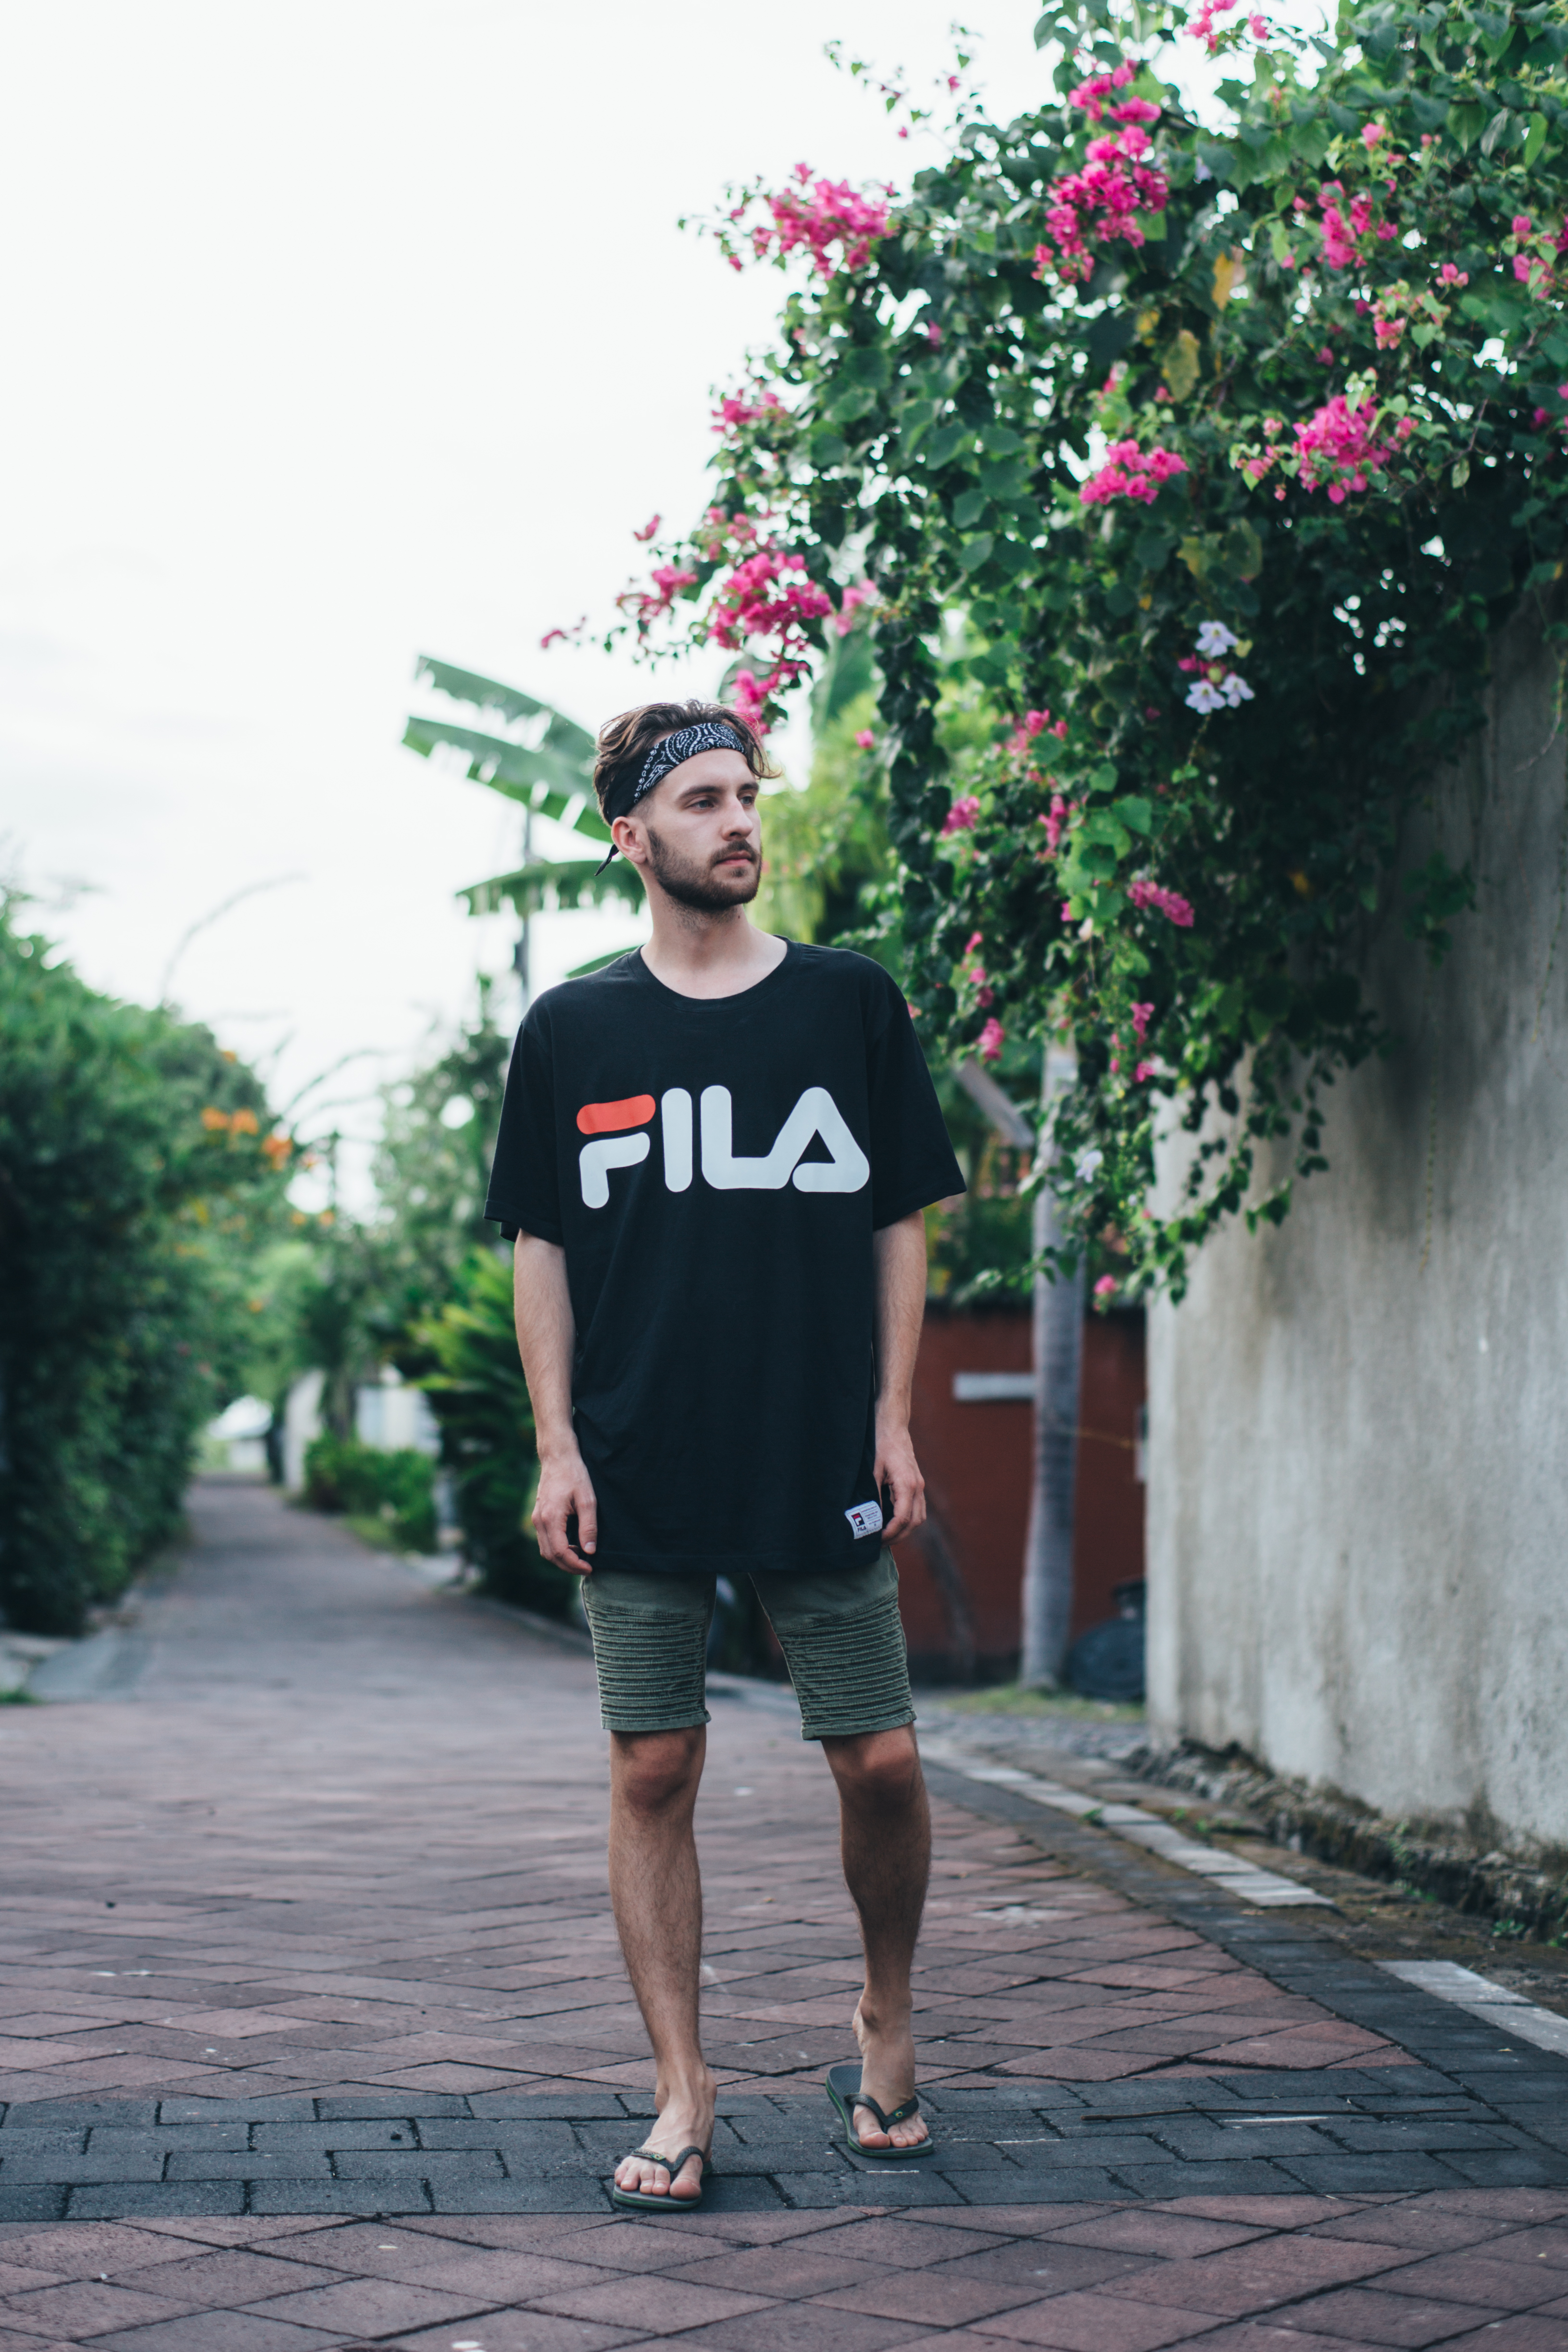 fila_bali_outfit-1-of-4